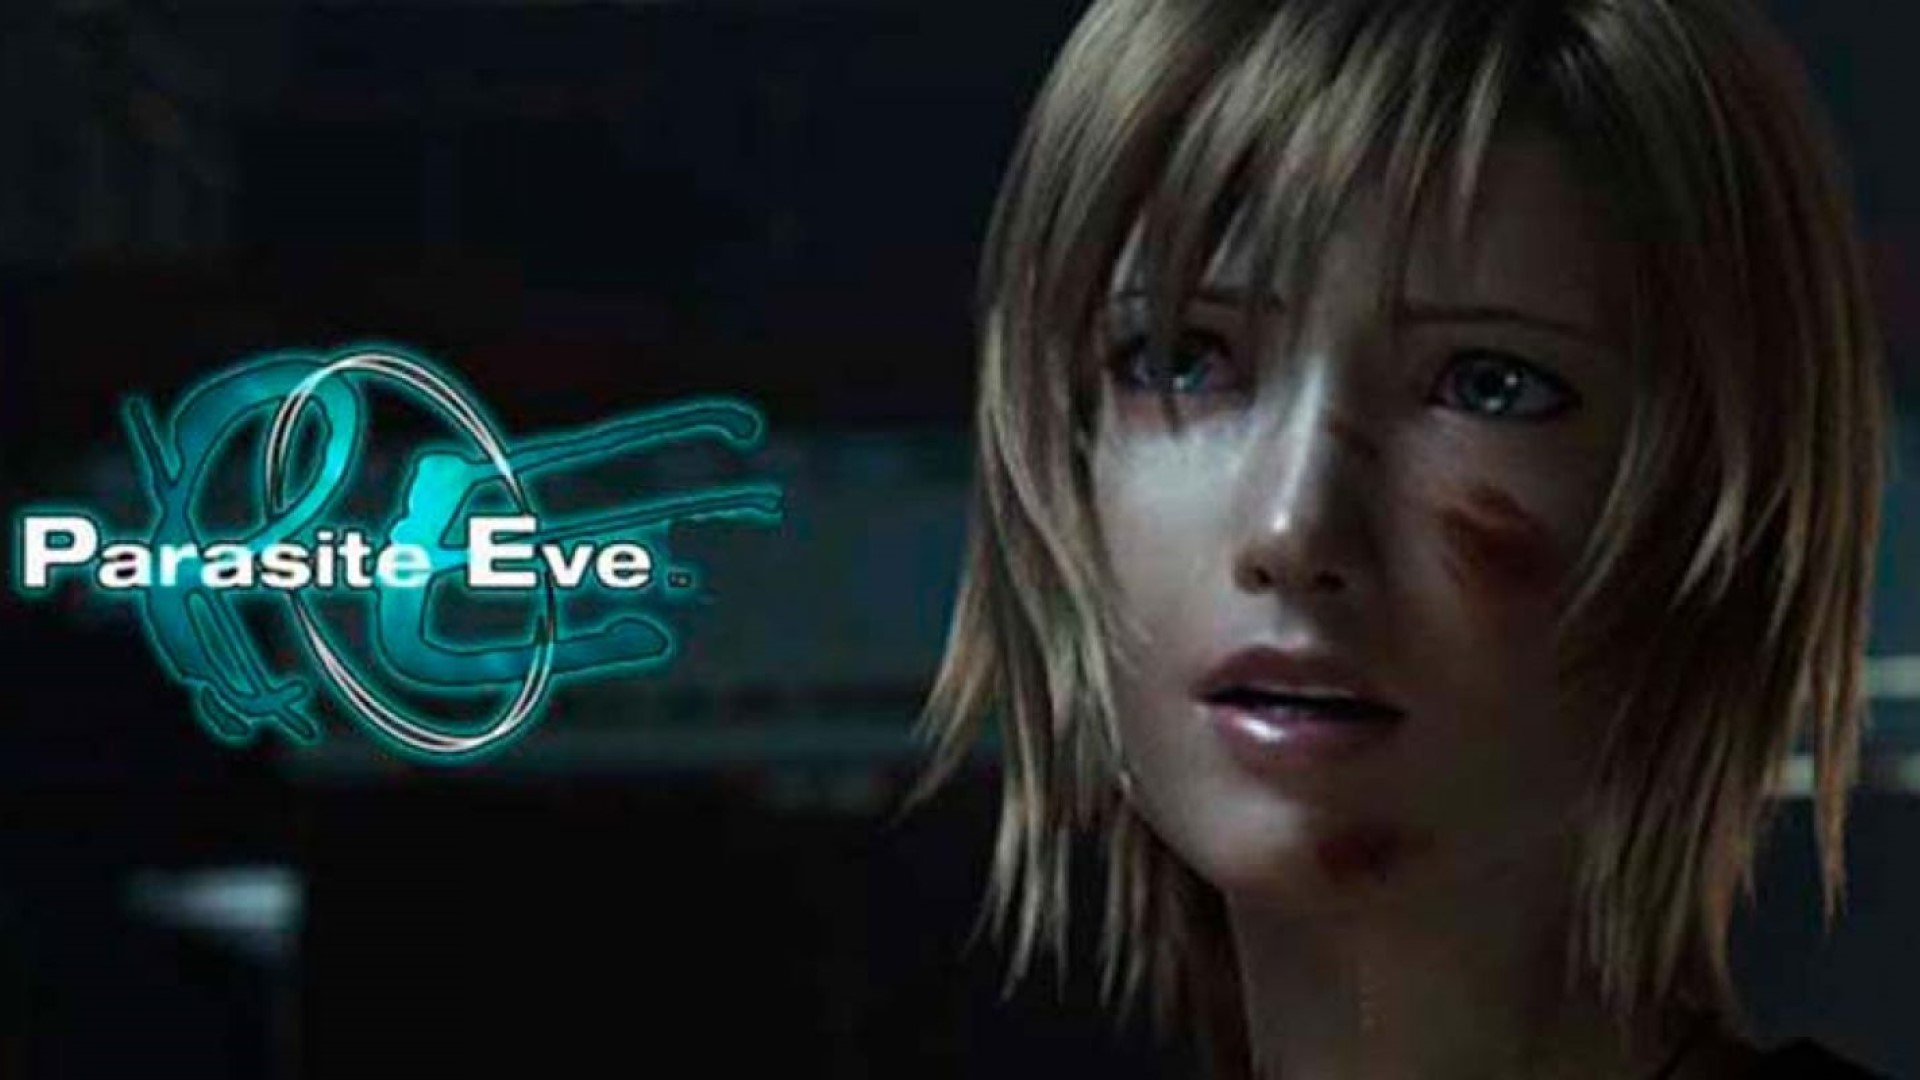 Parasite Eve Might Be The Next Dead Horror Series Making A Comeback